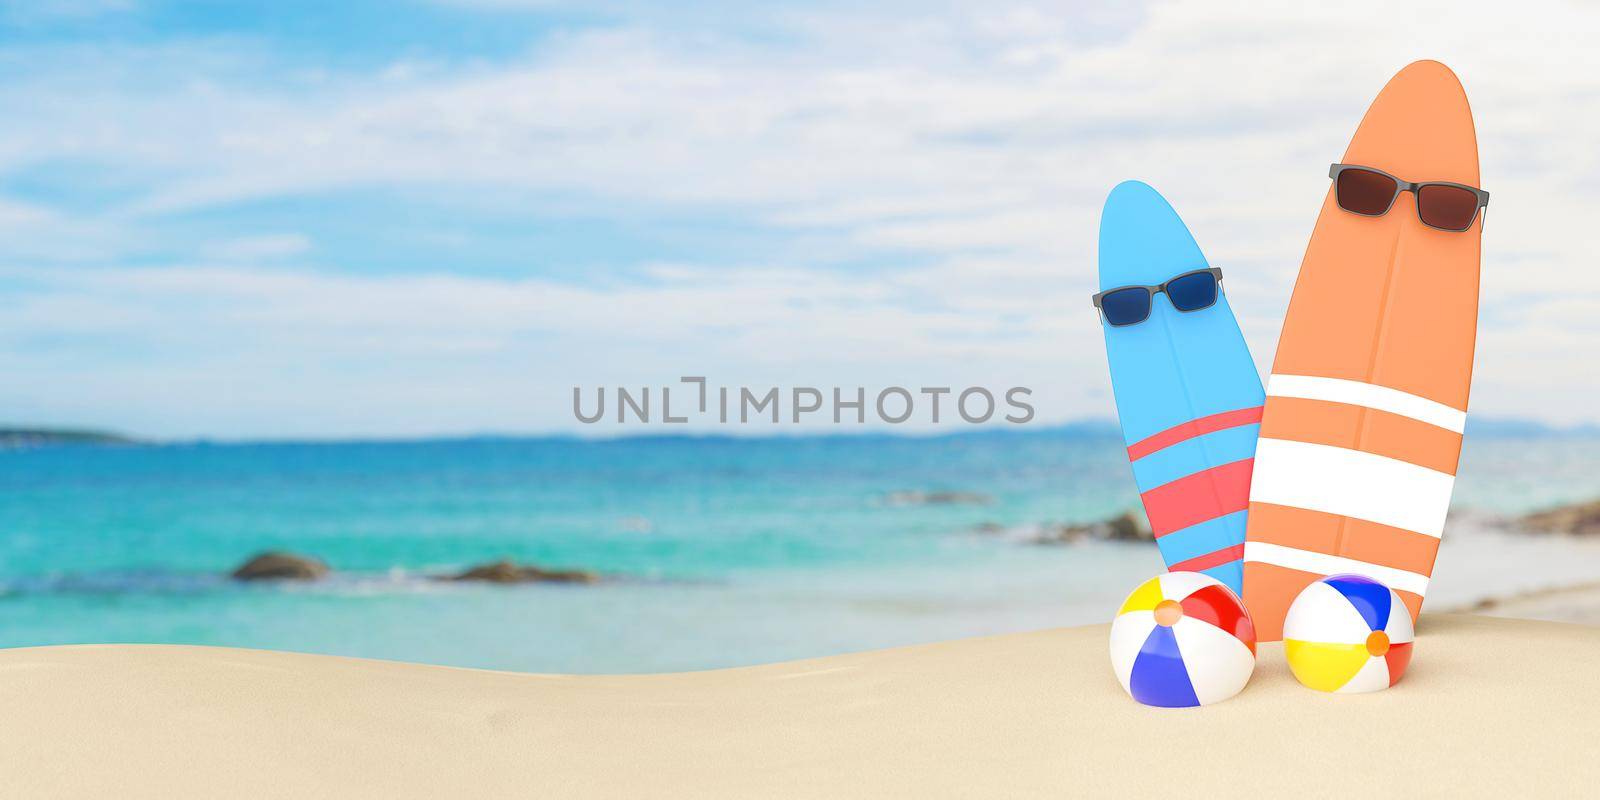 Surfboard wearing sunglasses with ball on the beach, 3d illustration by nutzchotwarut